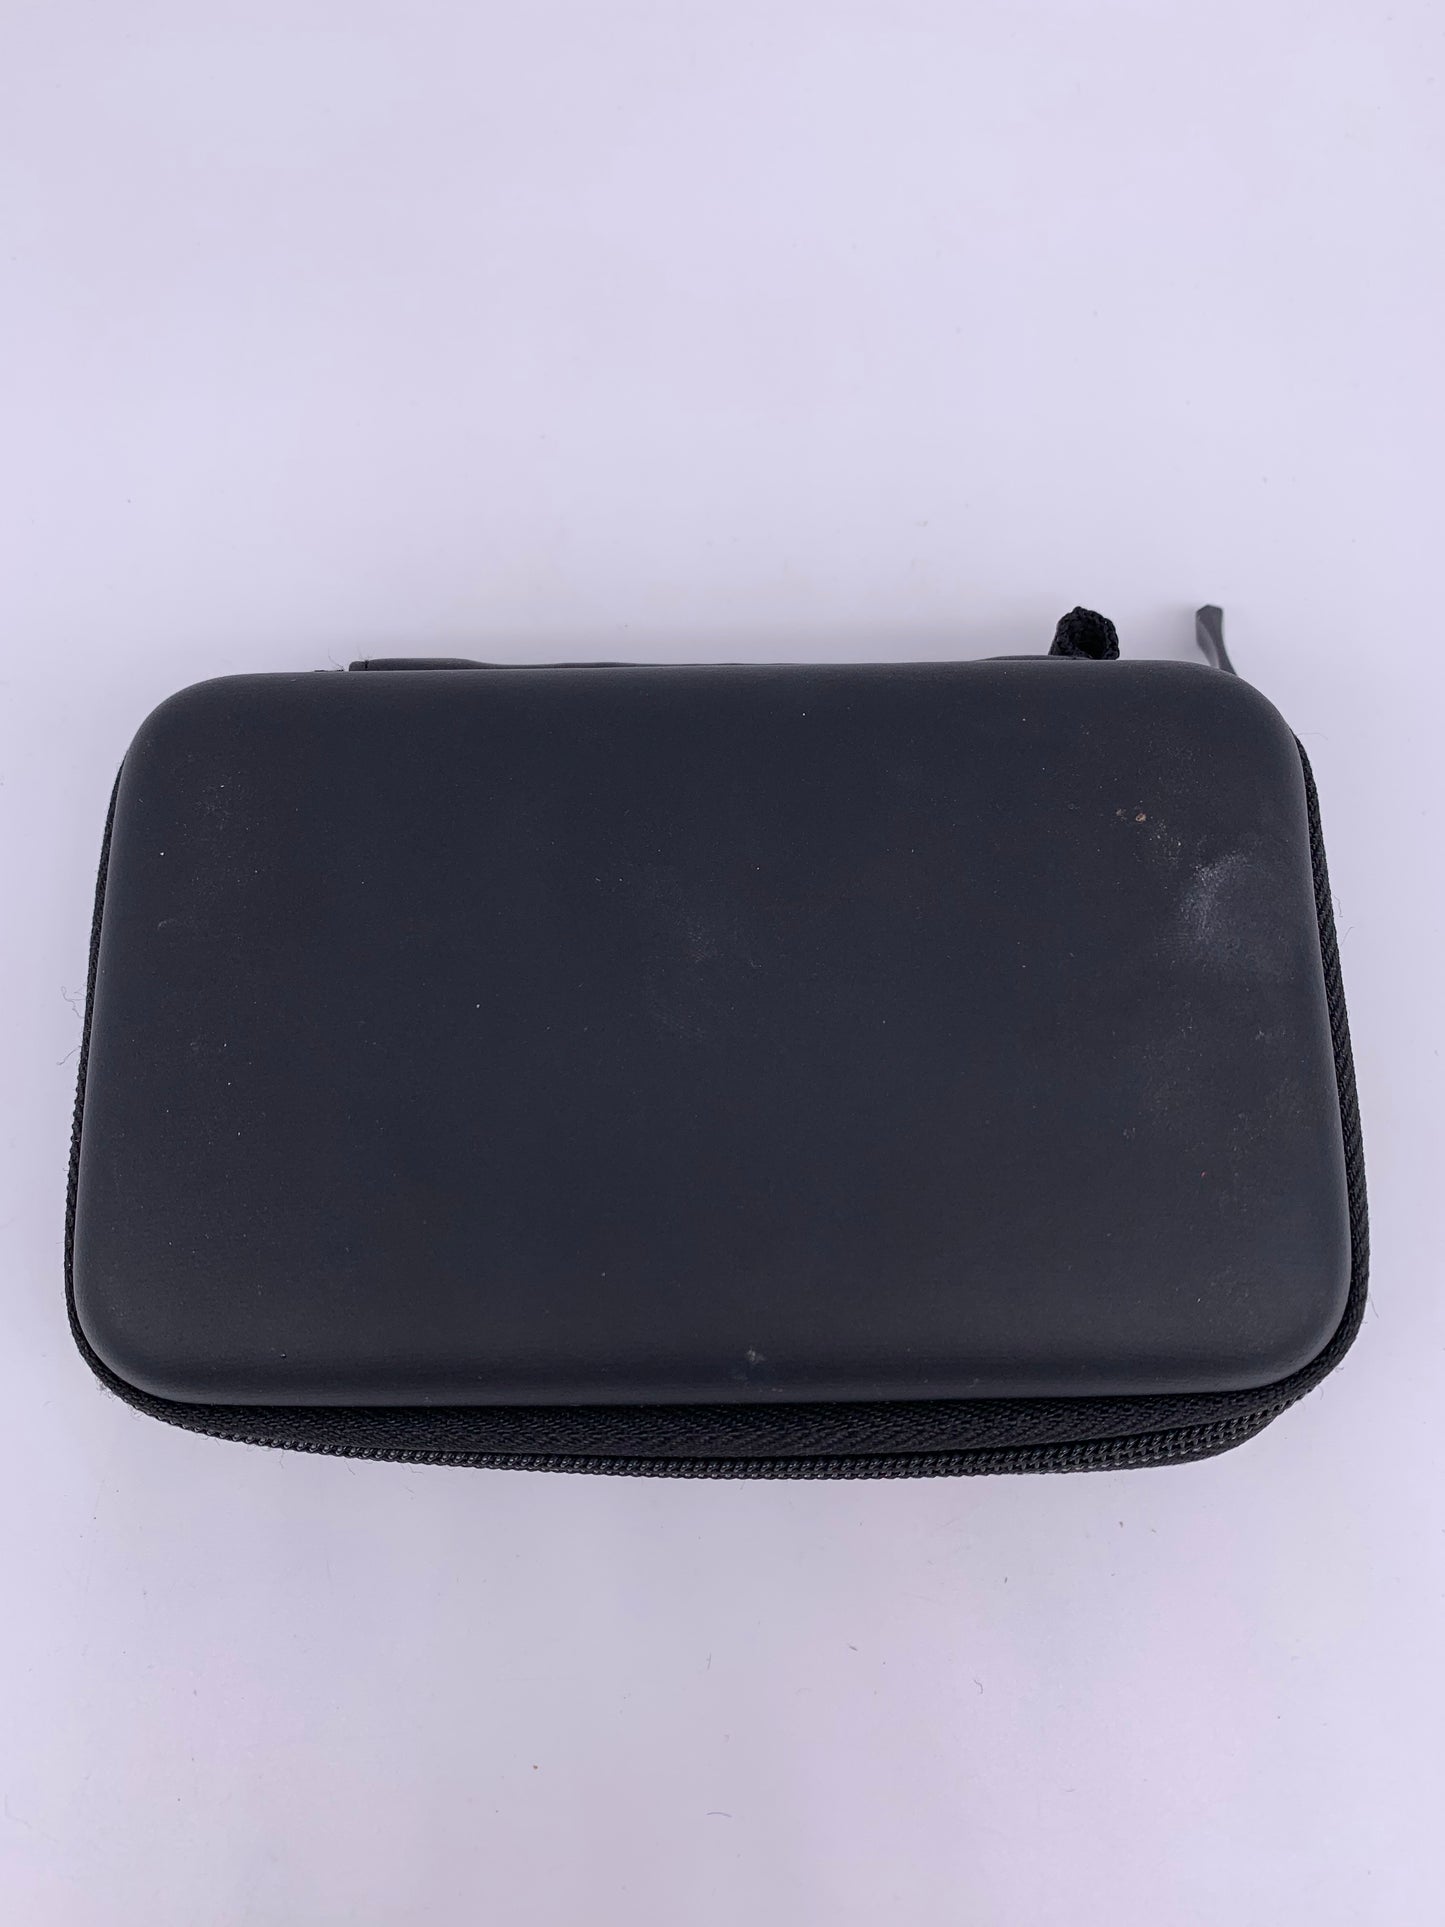 NiNTENDO DS | CARRYiNG CASE